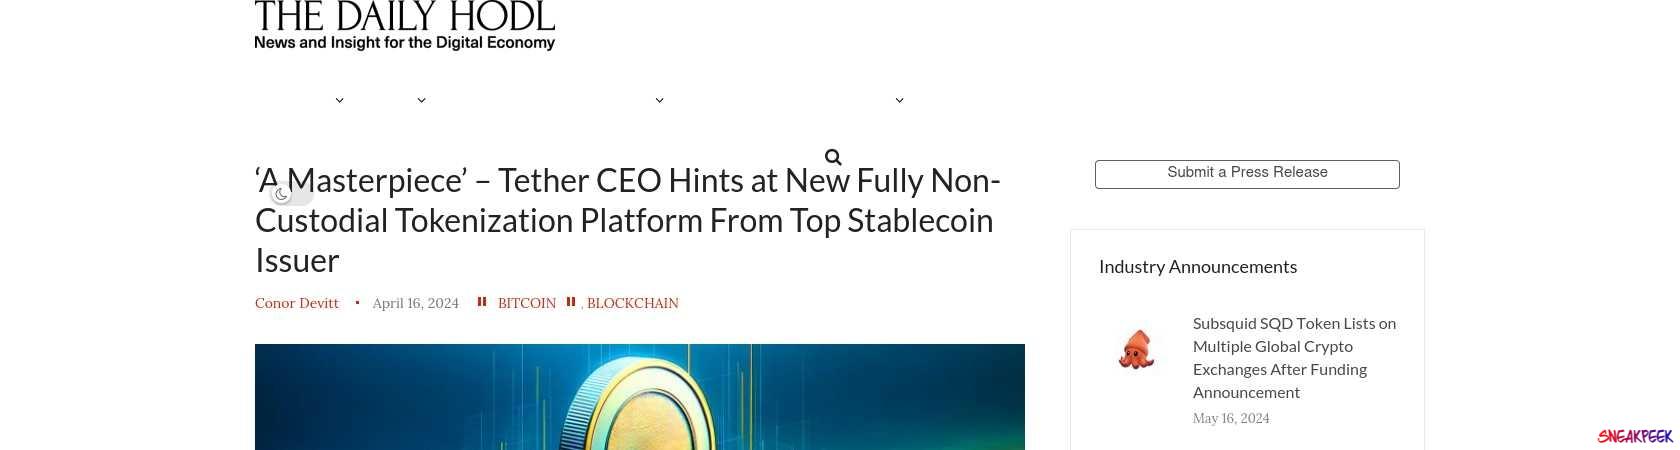 Read the full Article:  ⭲ ‘A Masterpiece’ – Tether CEO Hints at New Fully Non-Custodial Tokenization Platform From Top Stablecoin Issuer